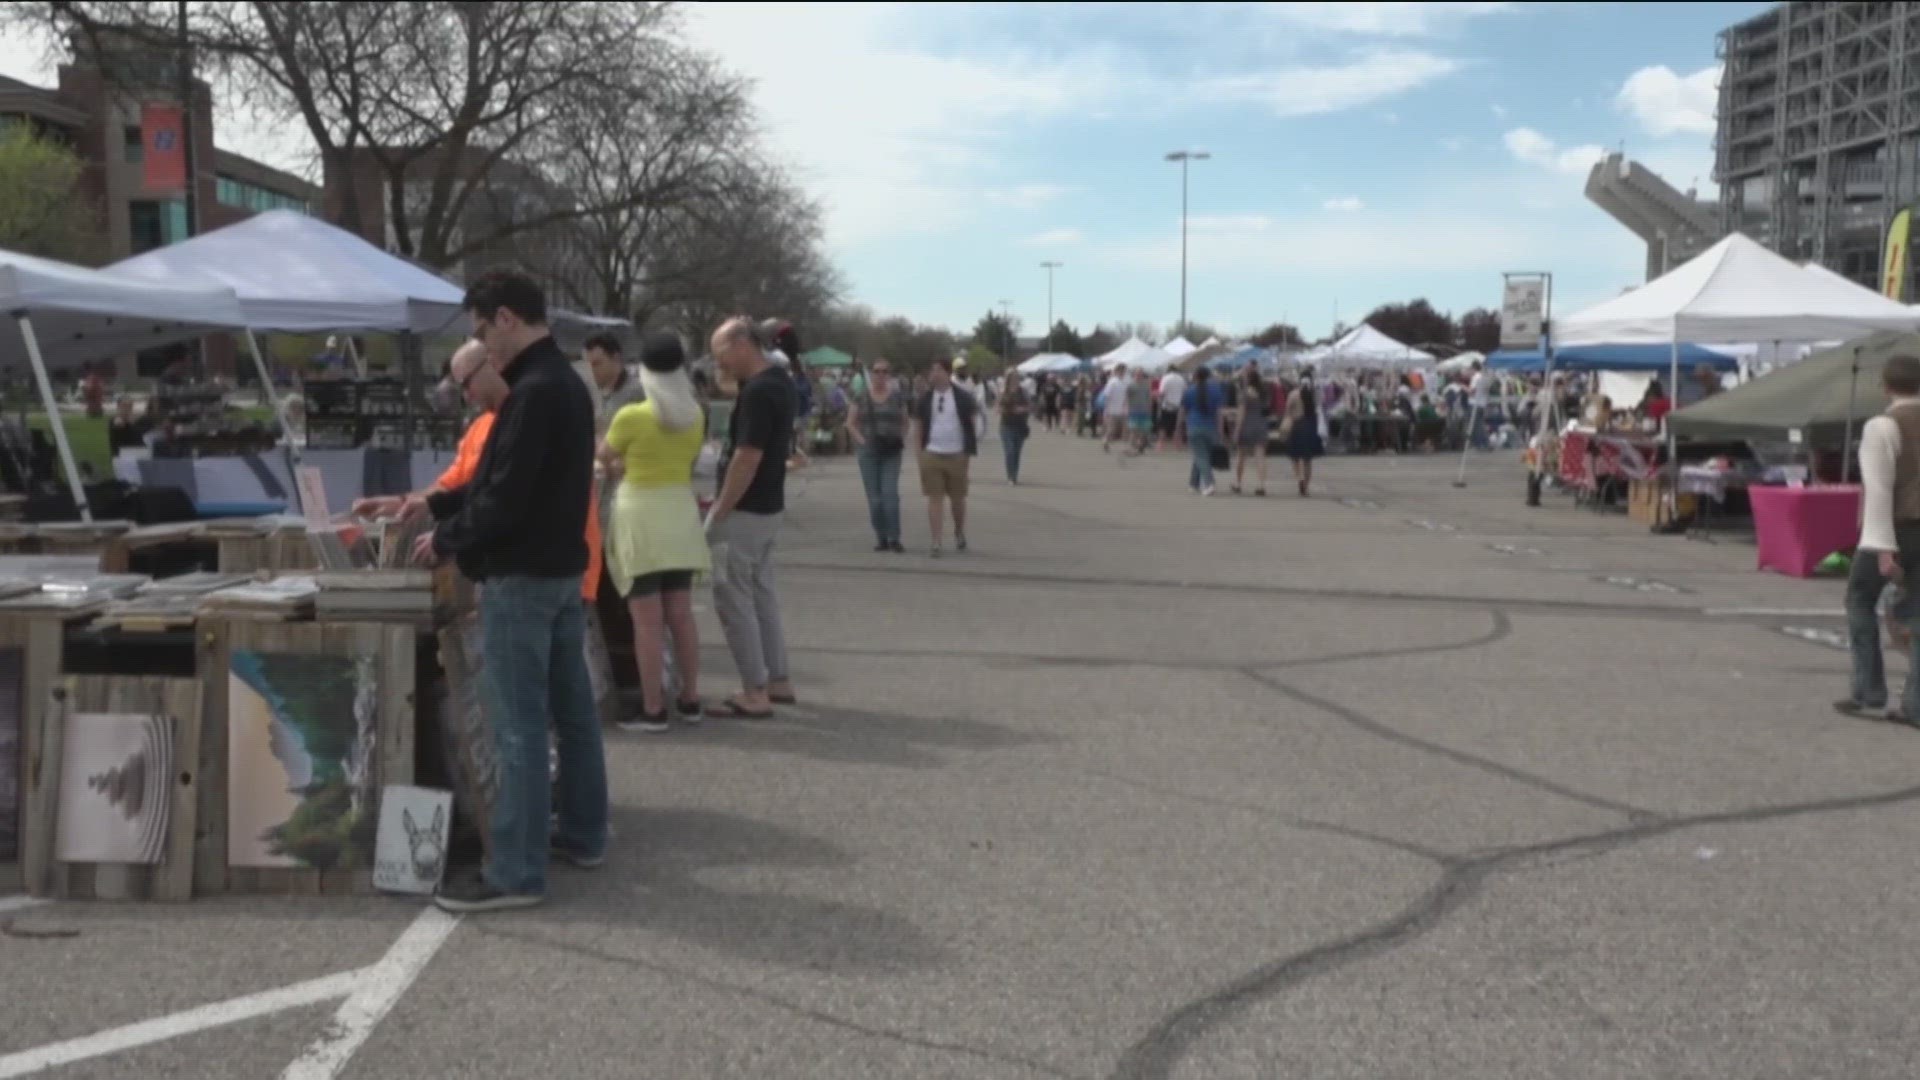 Hundreds of people showed up for the first "Boise Flea" of the season at the Boise State Stadium lot, despite some ominous clouds.